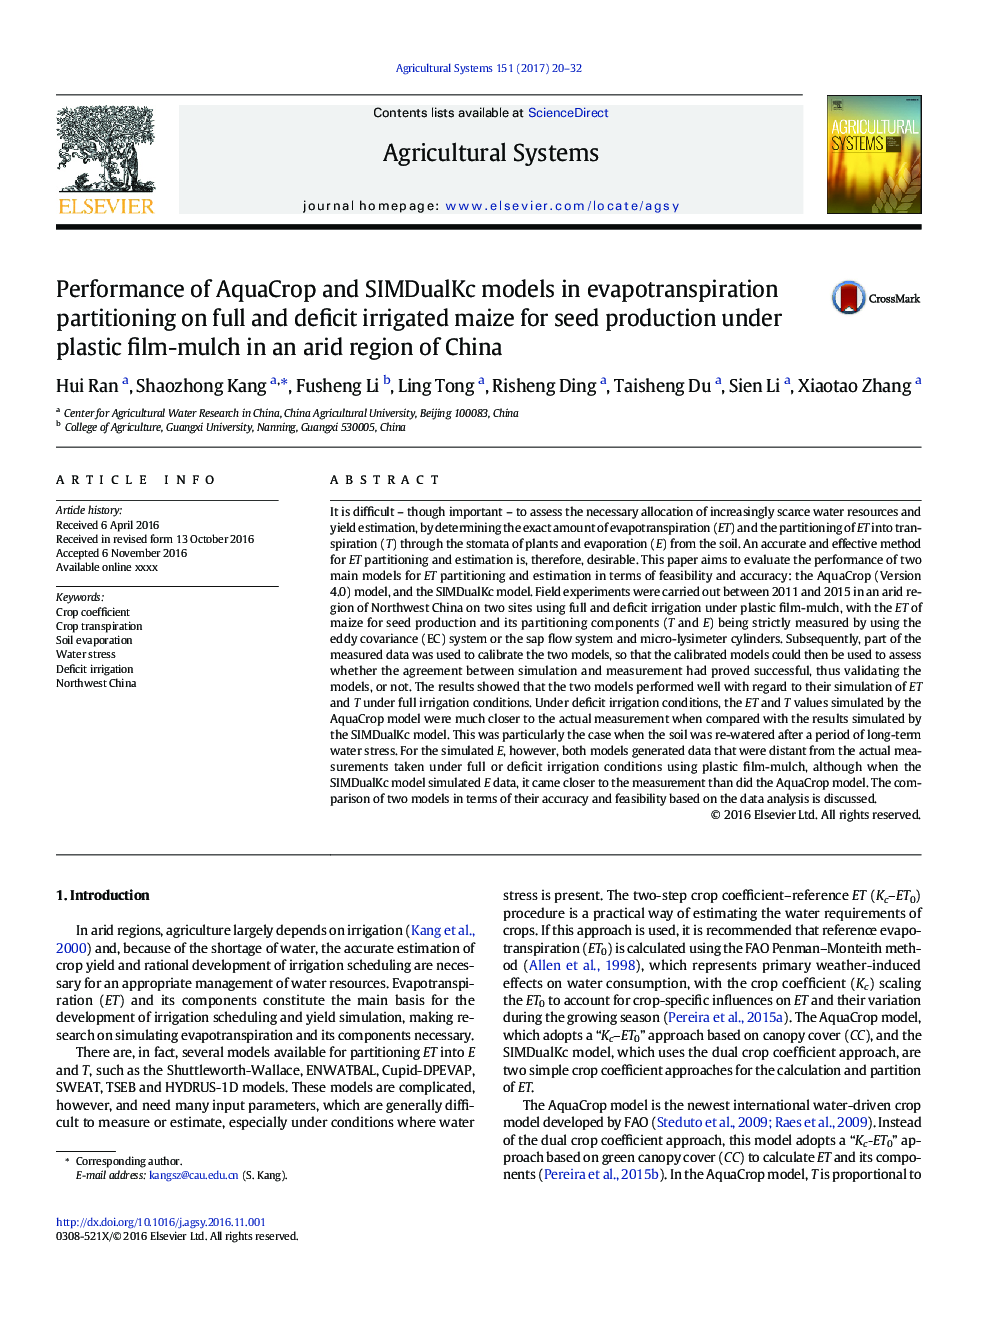 Performance of AquaCrop and SIMDualKc models in evapotranspiration partitioning on full and deficit irrigated maize for seed production under plastic film-mulch in an arid region of China